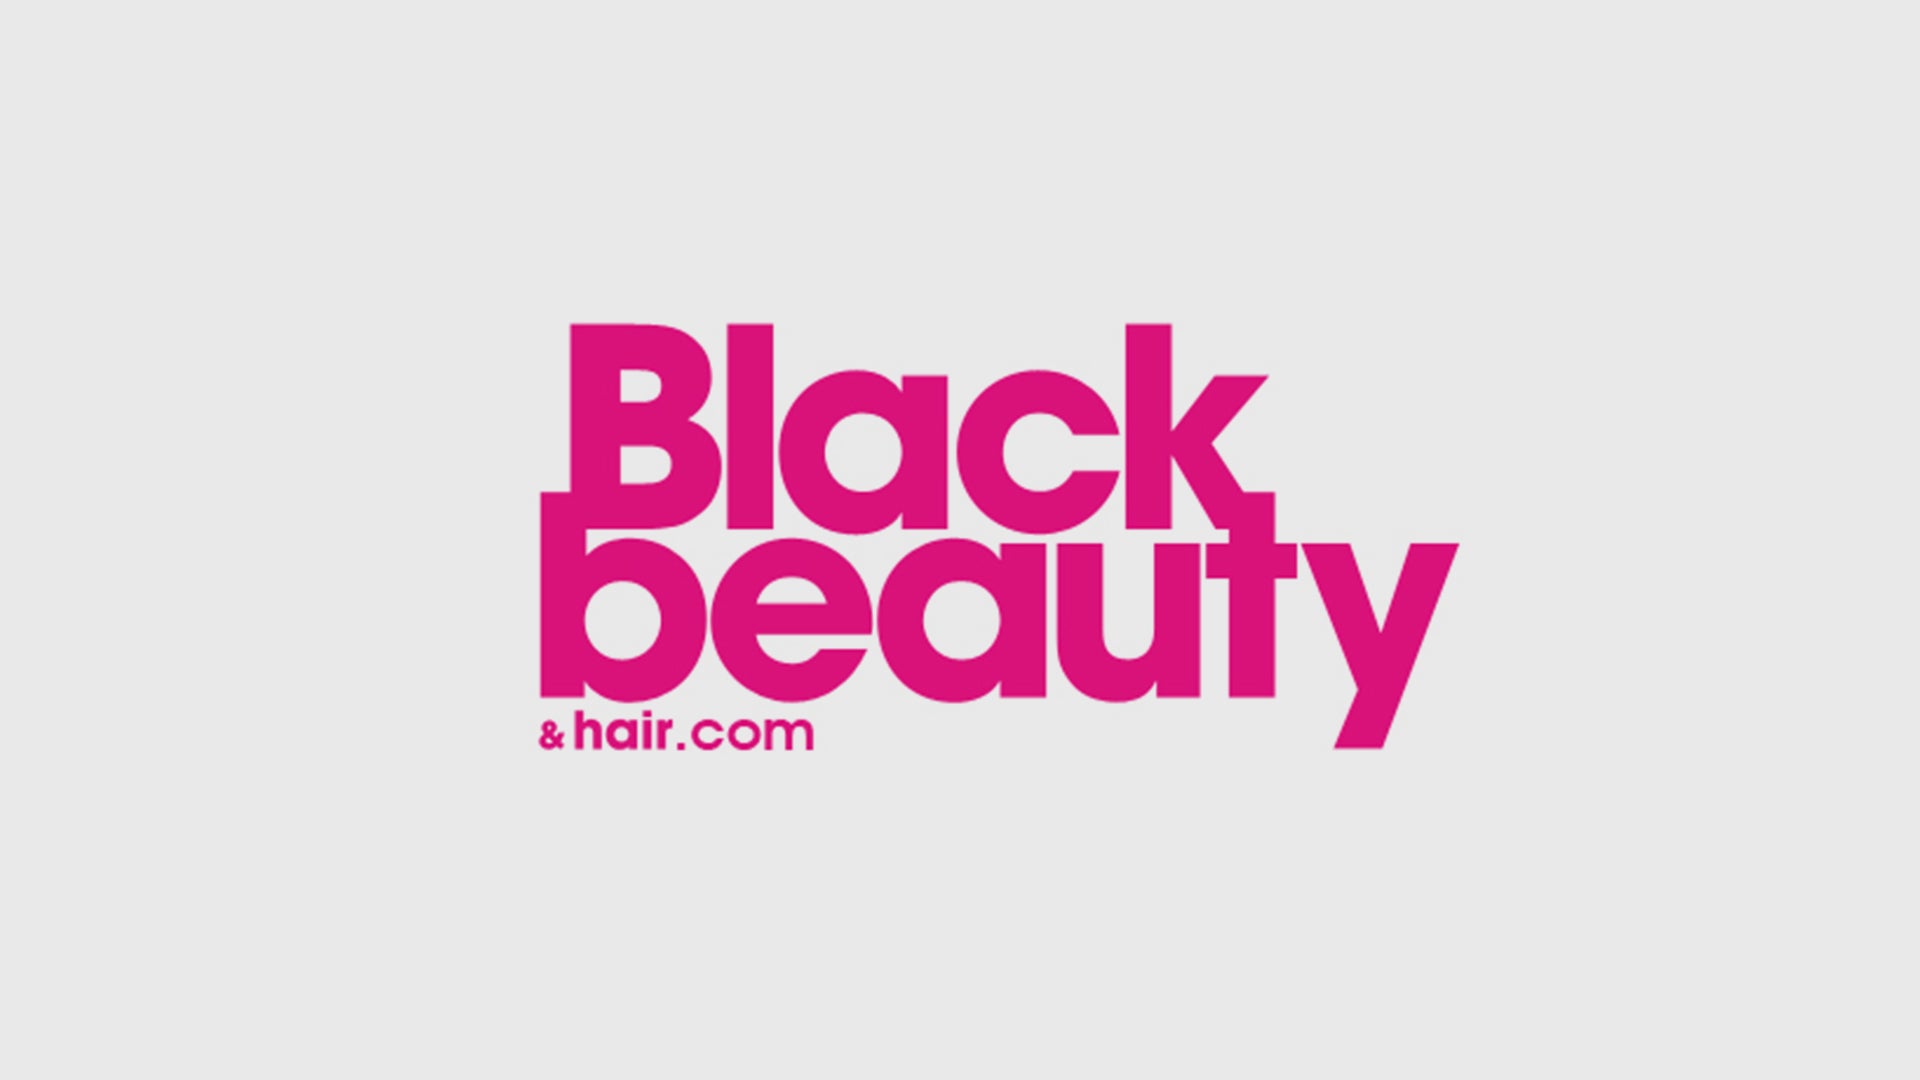 Black Beauty and Hair magazine feature